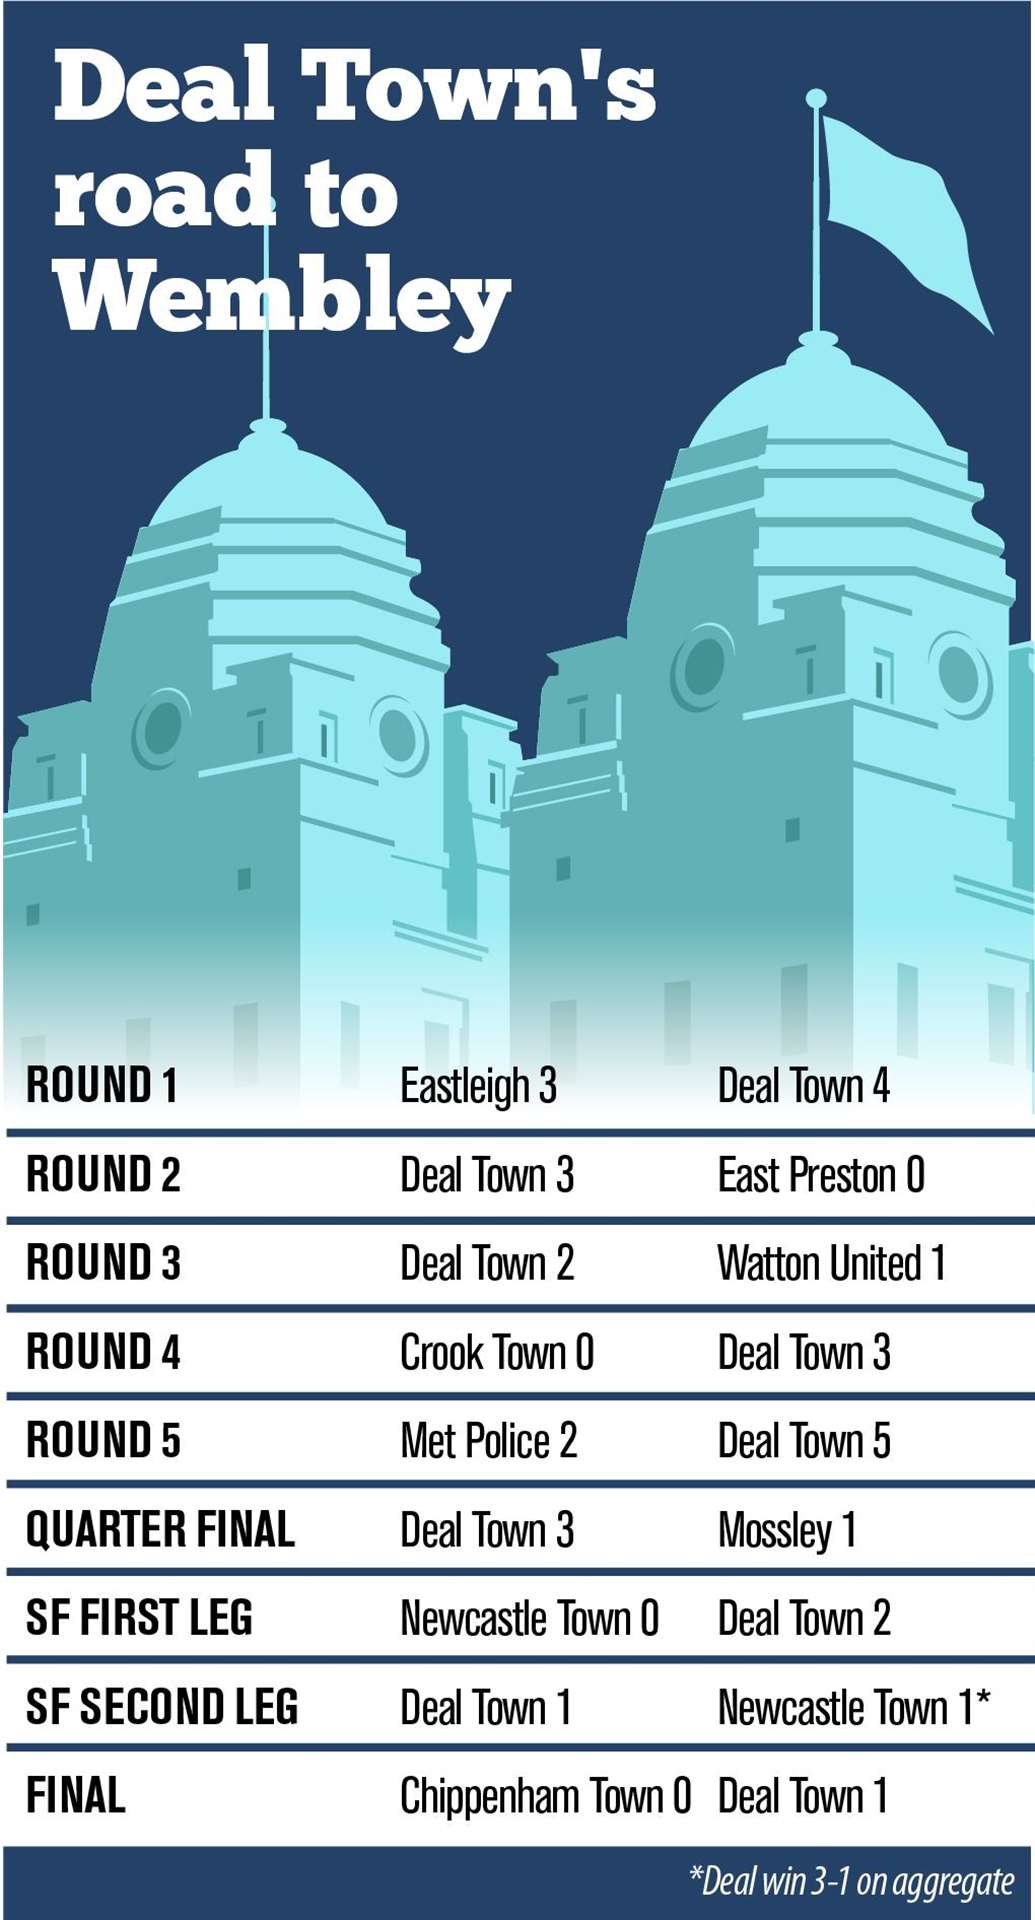 Deal Town road to Wembley (34413214)